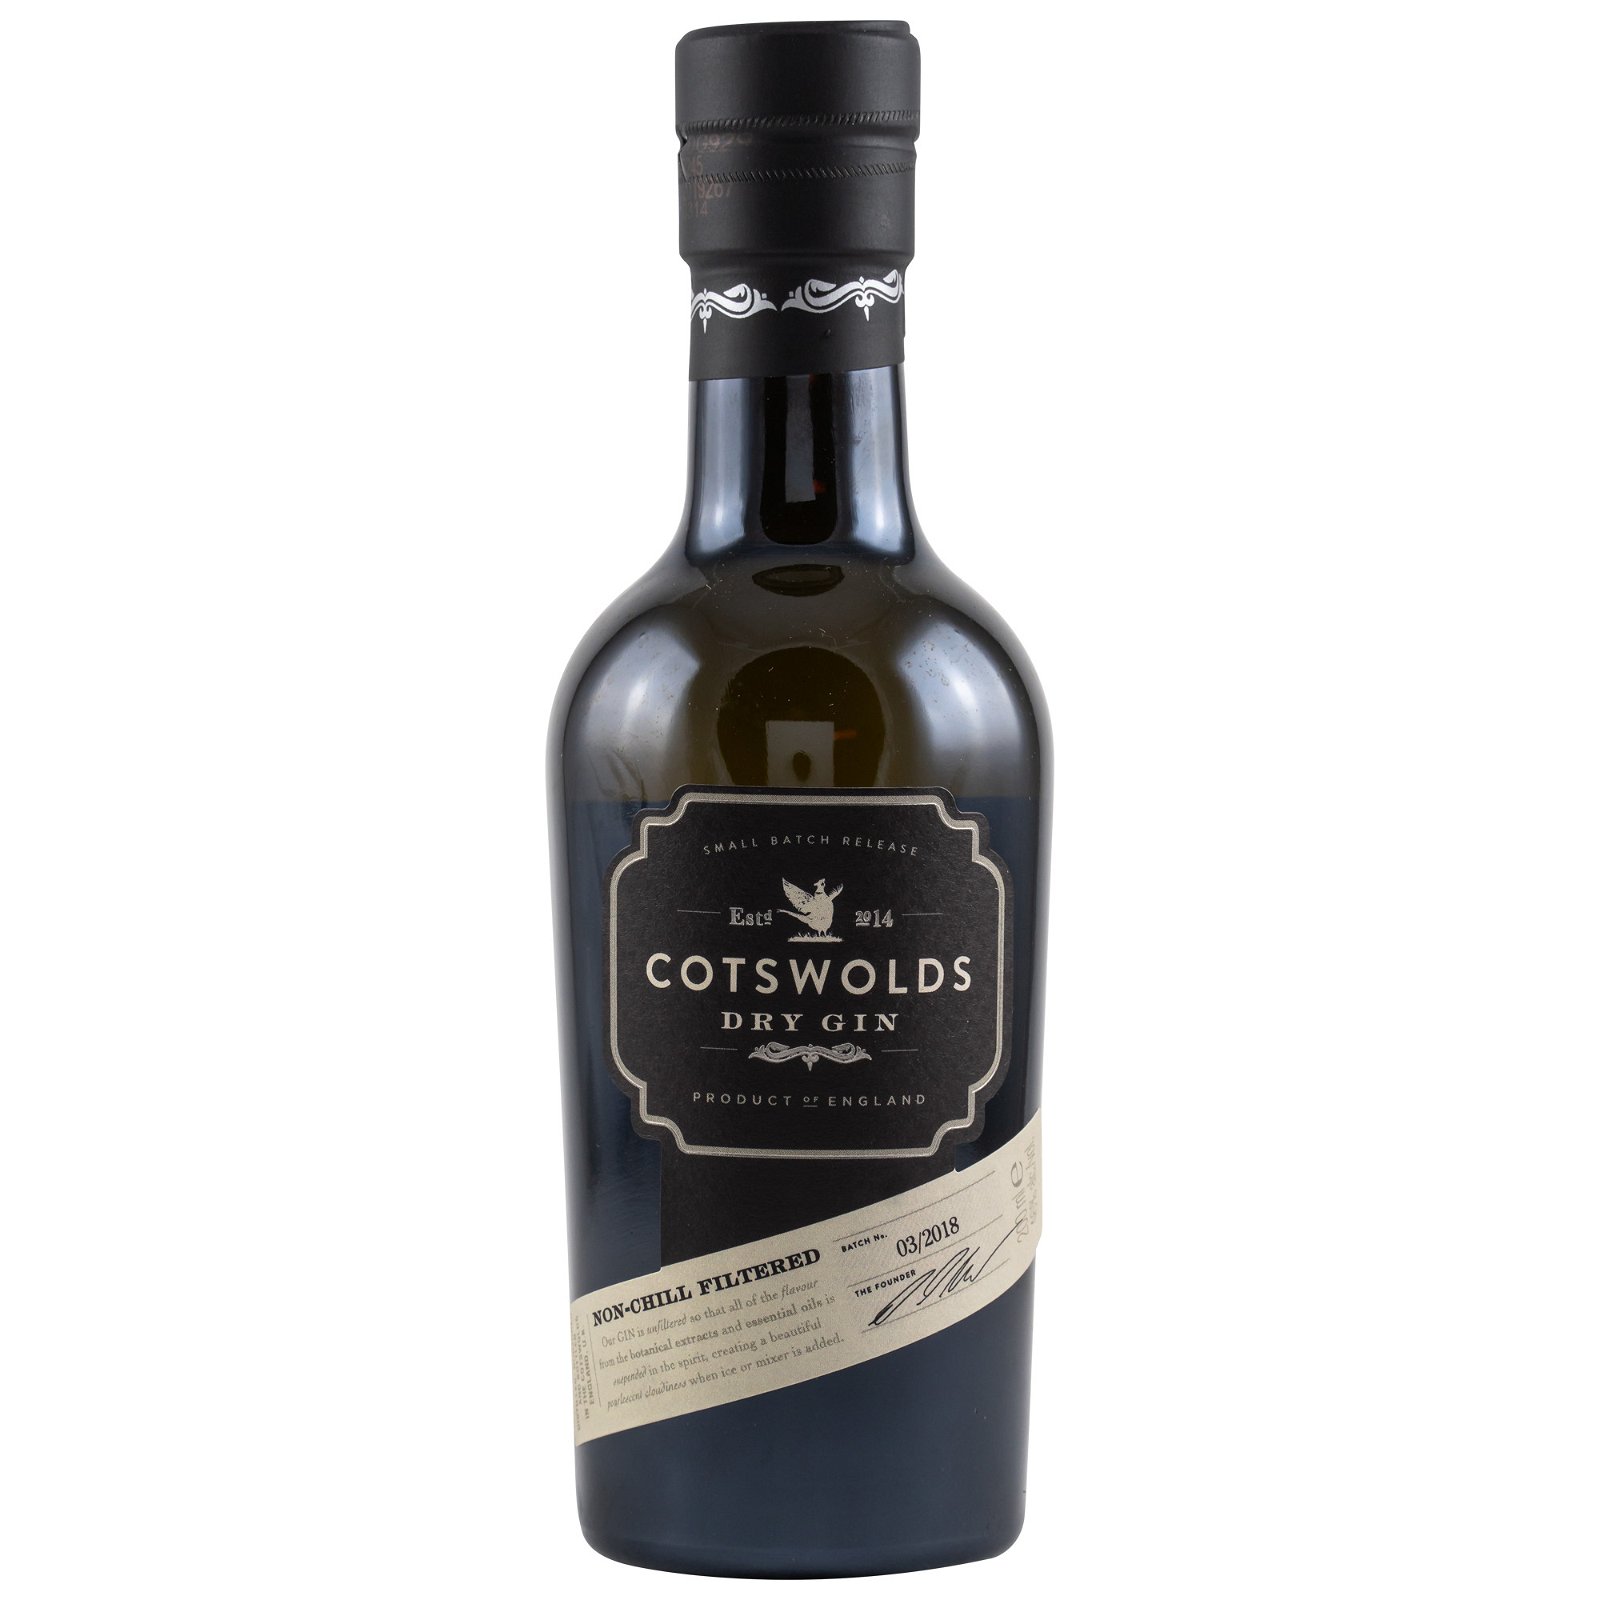 Cotswolds Dry Gin Small Batch Release (200ml)